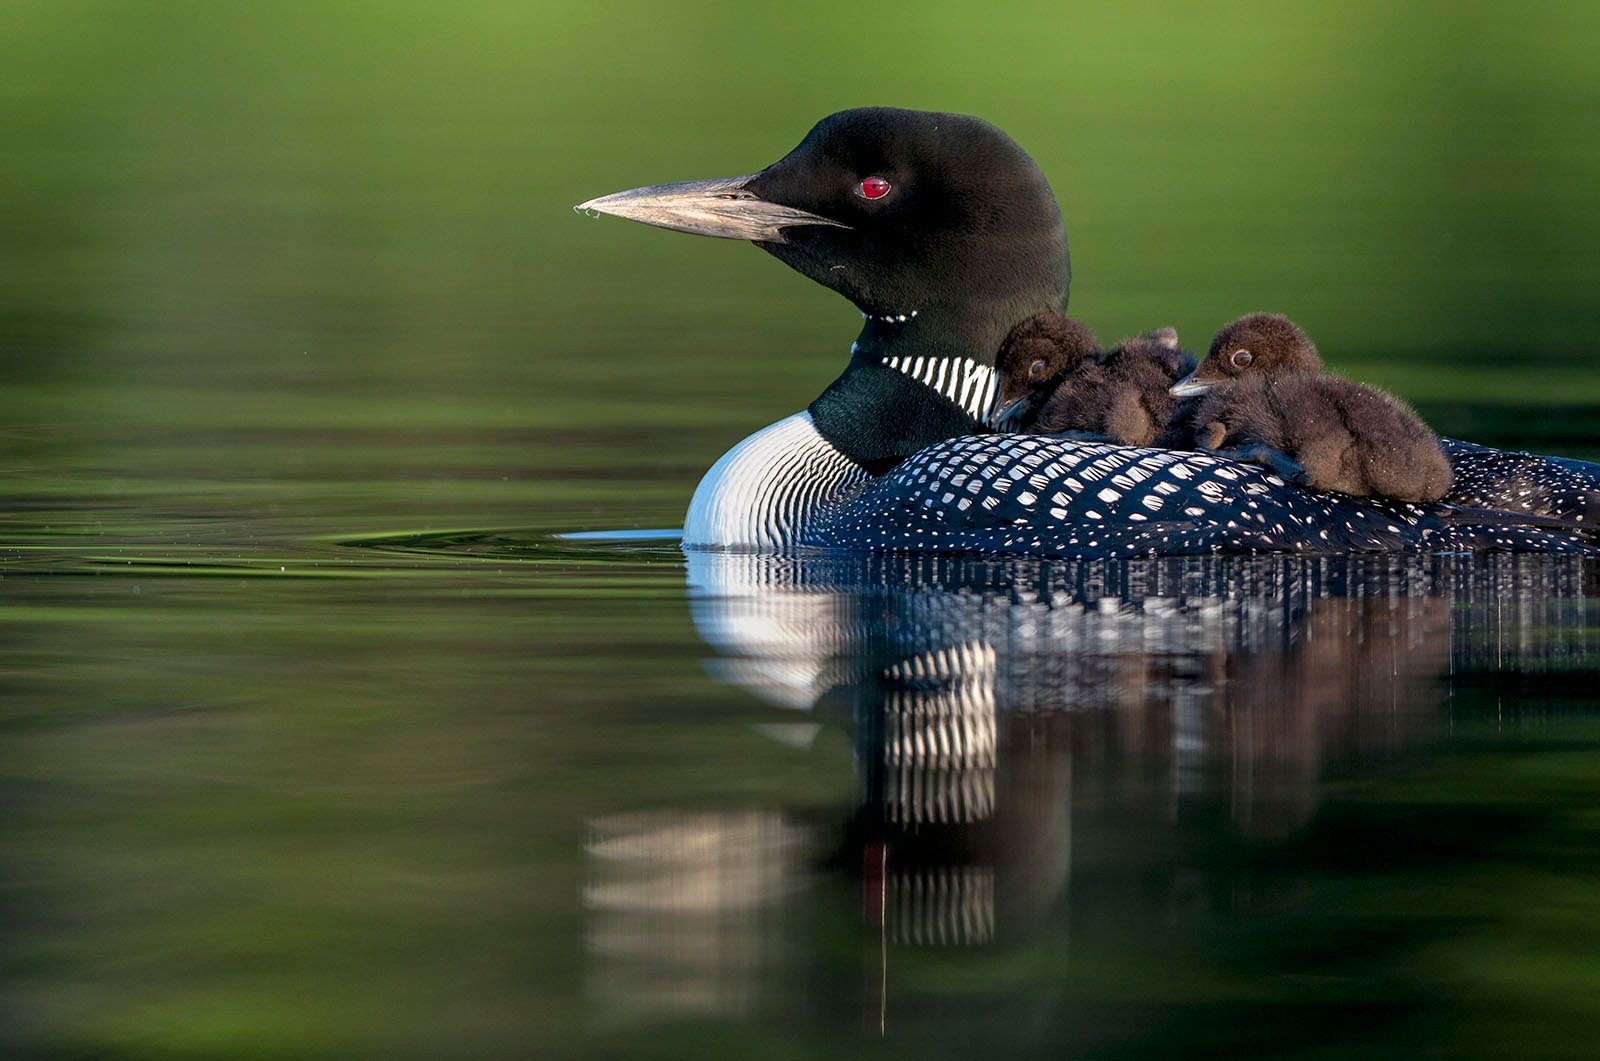 A common loon, with a sleek black head and spotted body, floats in the calm water, carrying two fluffy brown chicks on its back. The bird's distinctive red eyes are striking.